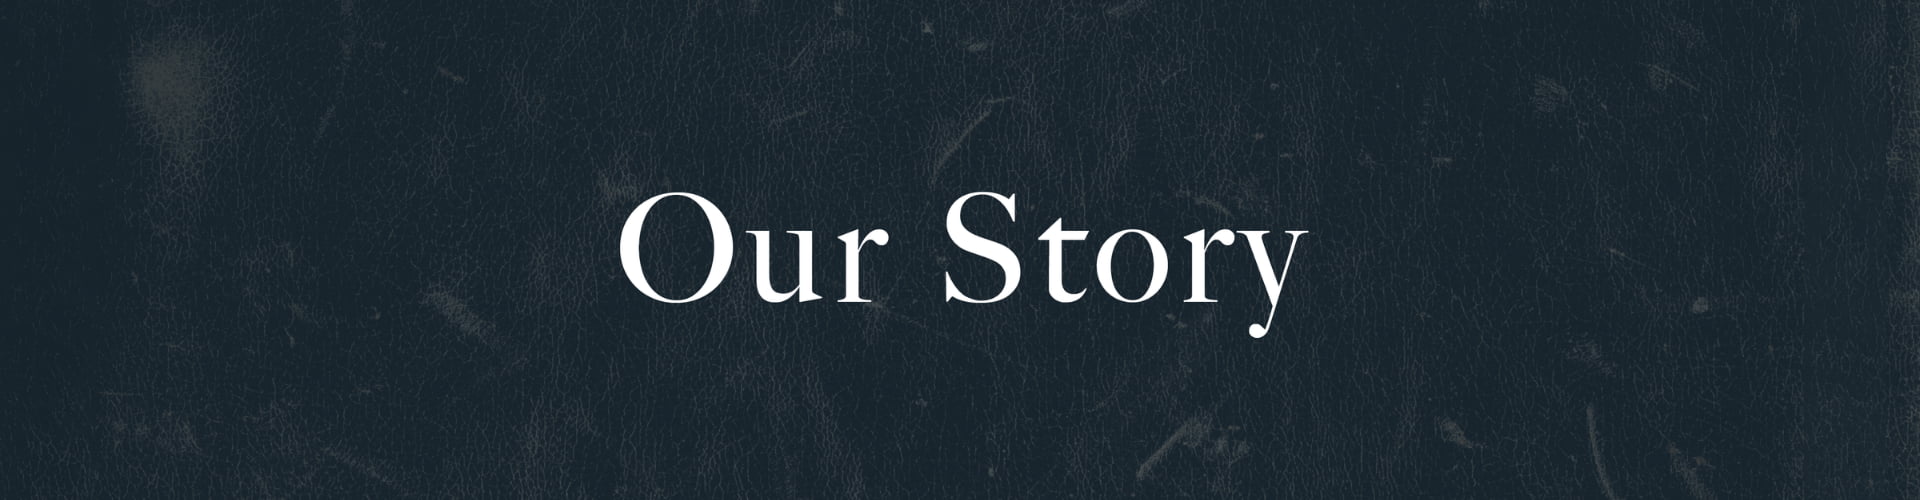 Our Story | About The Clerk & Well